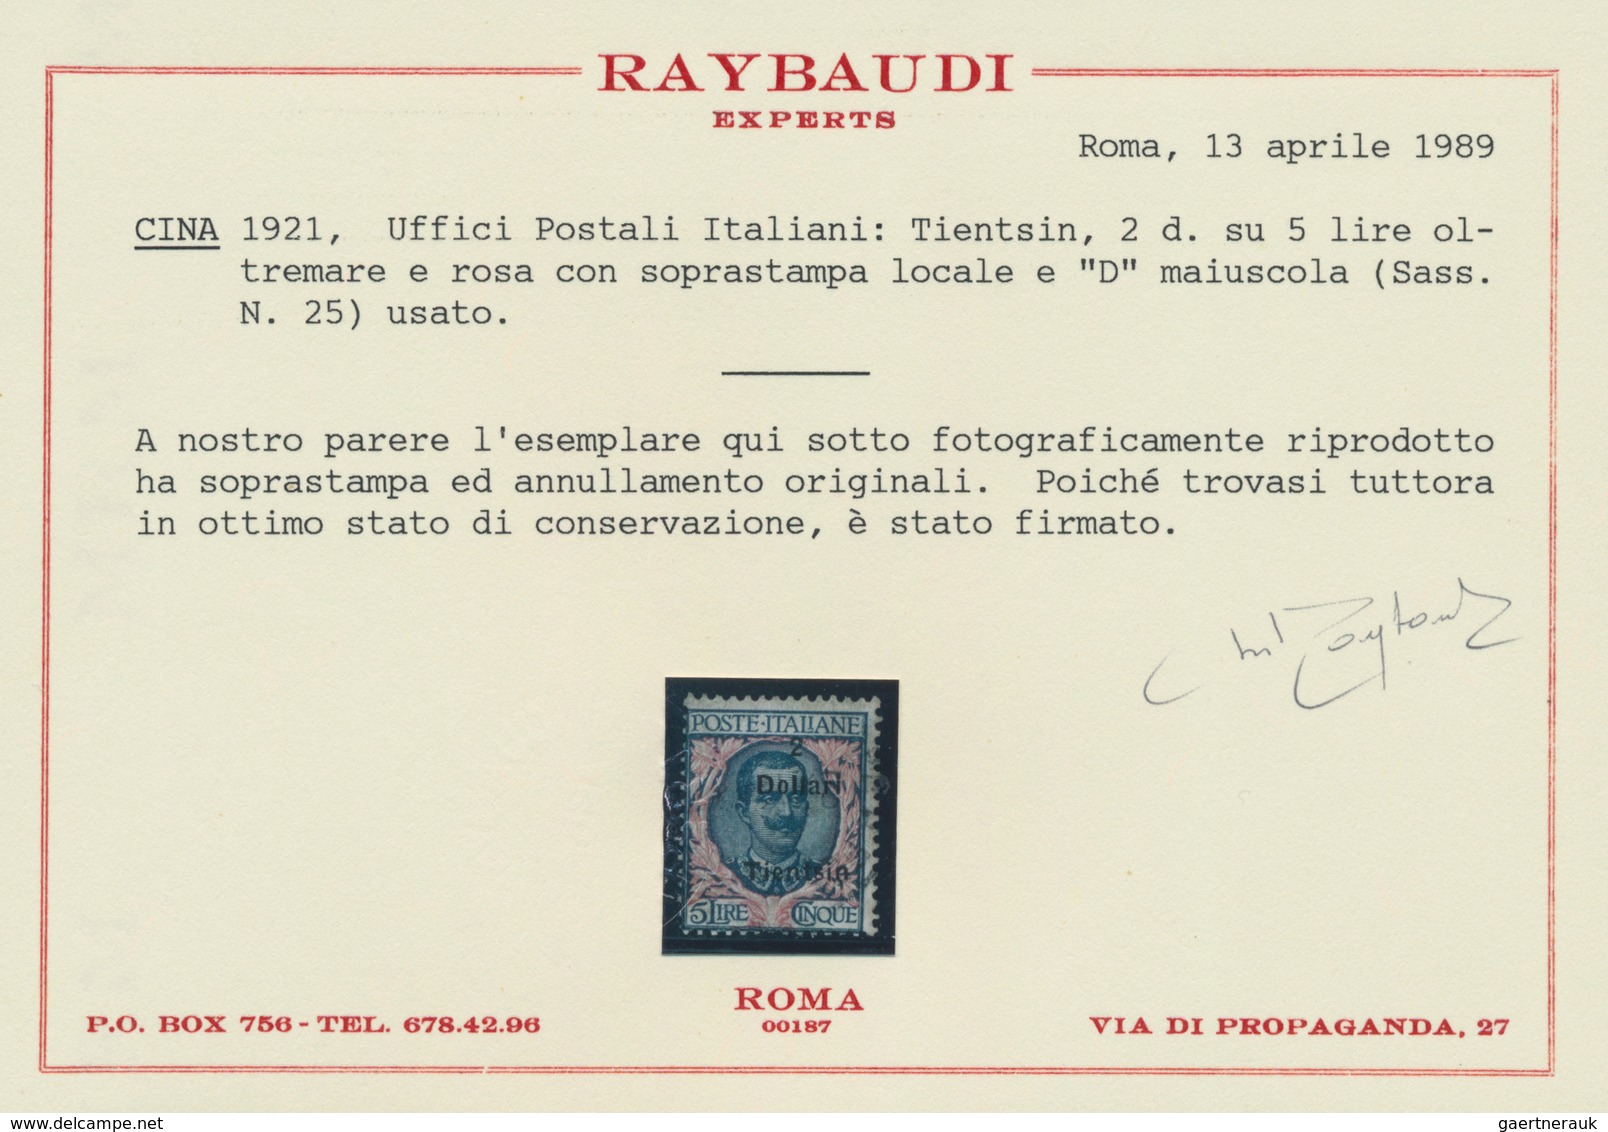 Italienische Post In China: 1919, $2 On 5l. Blue/rose, Used Copy, Reperforated. Certificates E.Diena - Tientsin